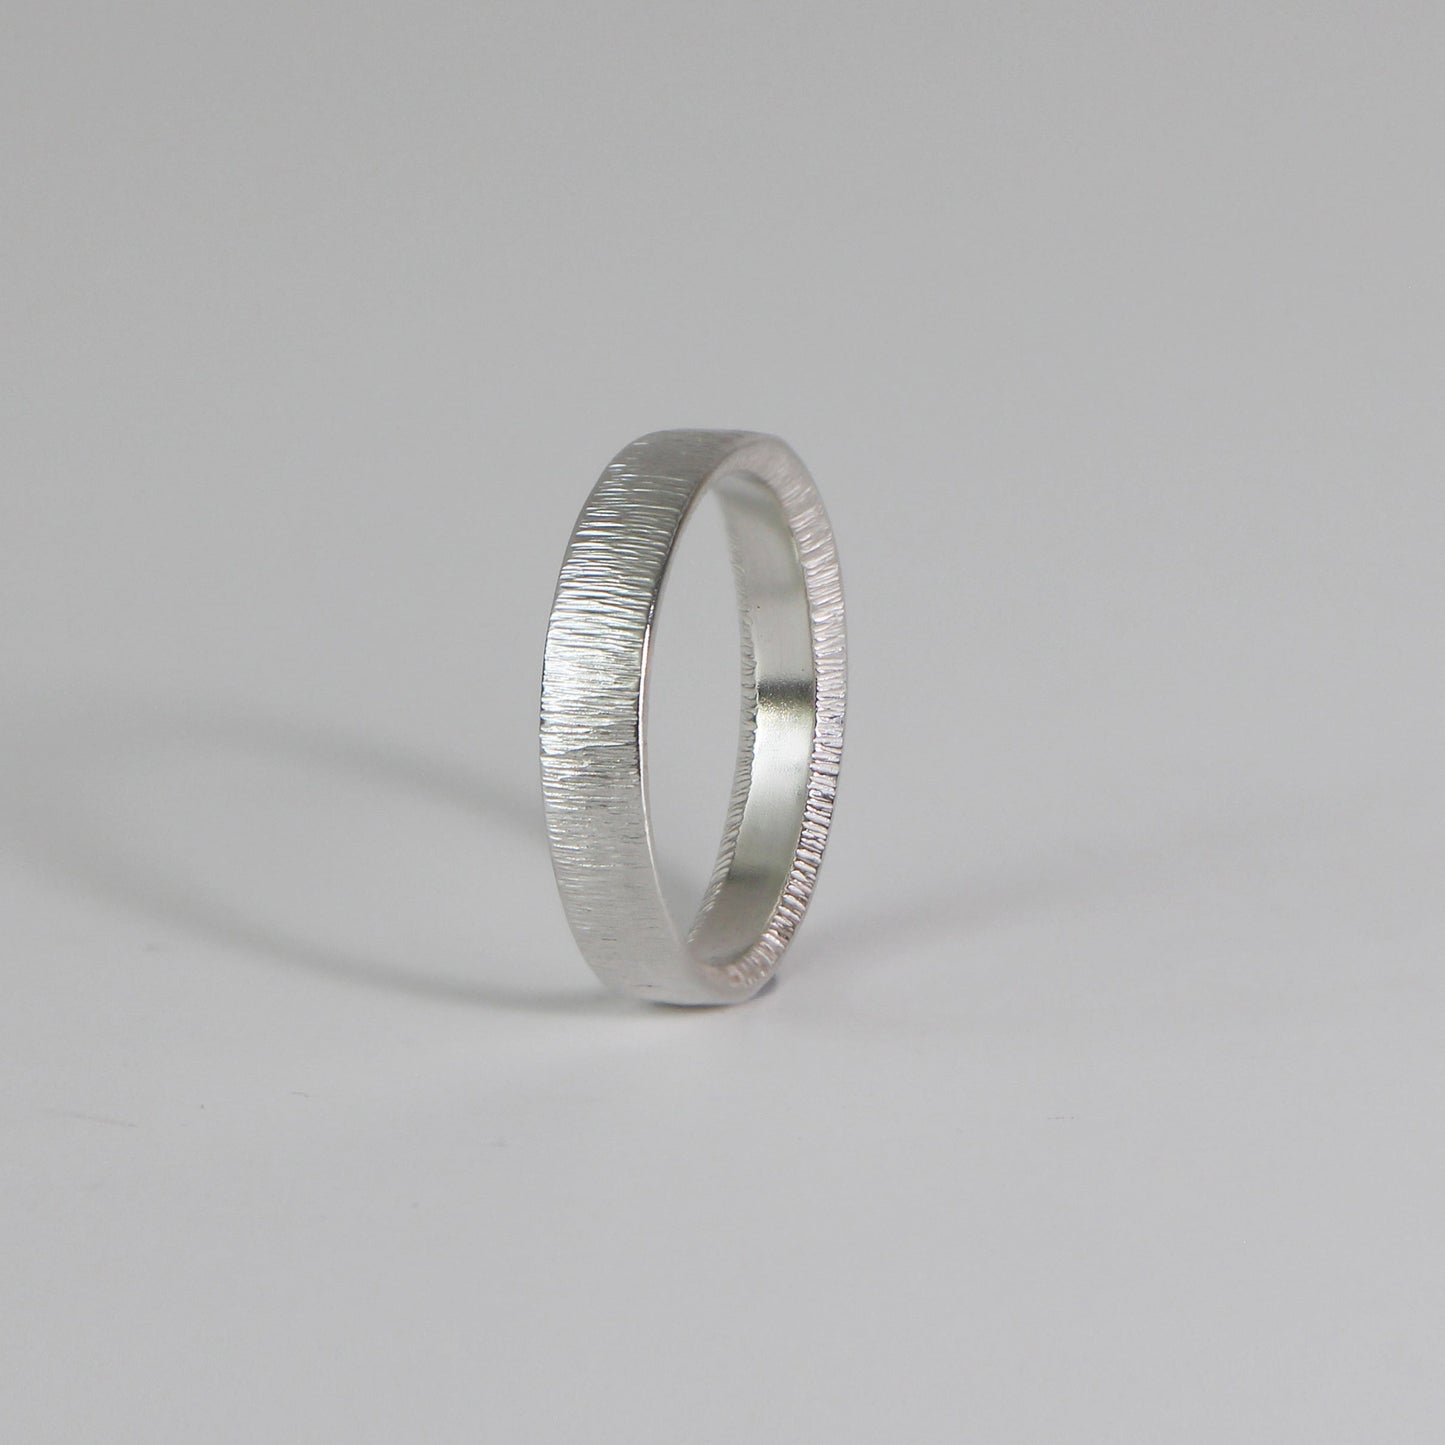 Sunshine Hammered Texture Band - Silver Hammered - Aisling Chou Studio